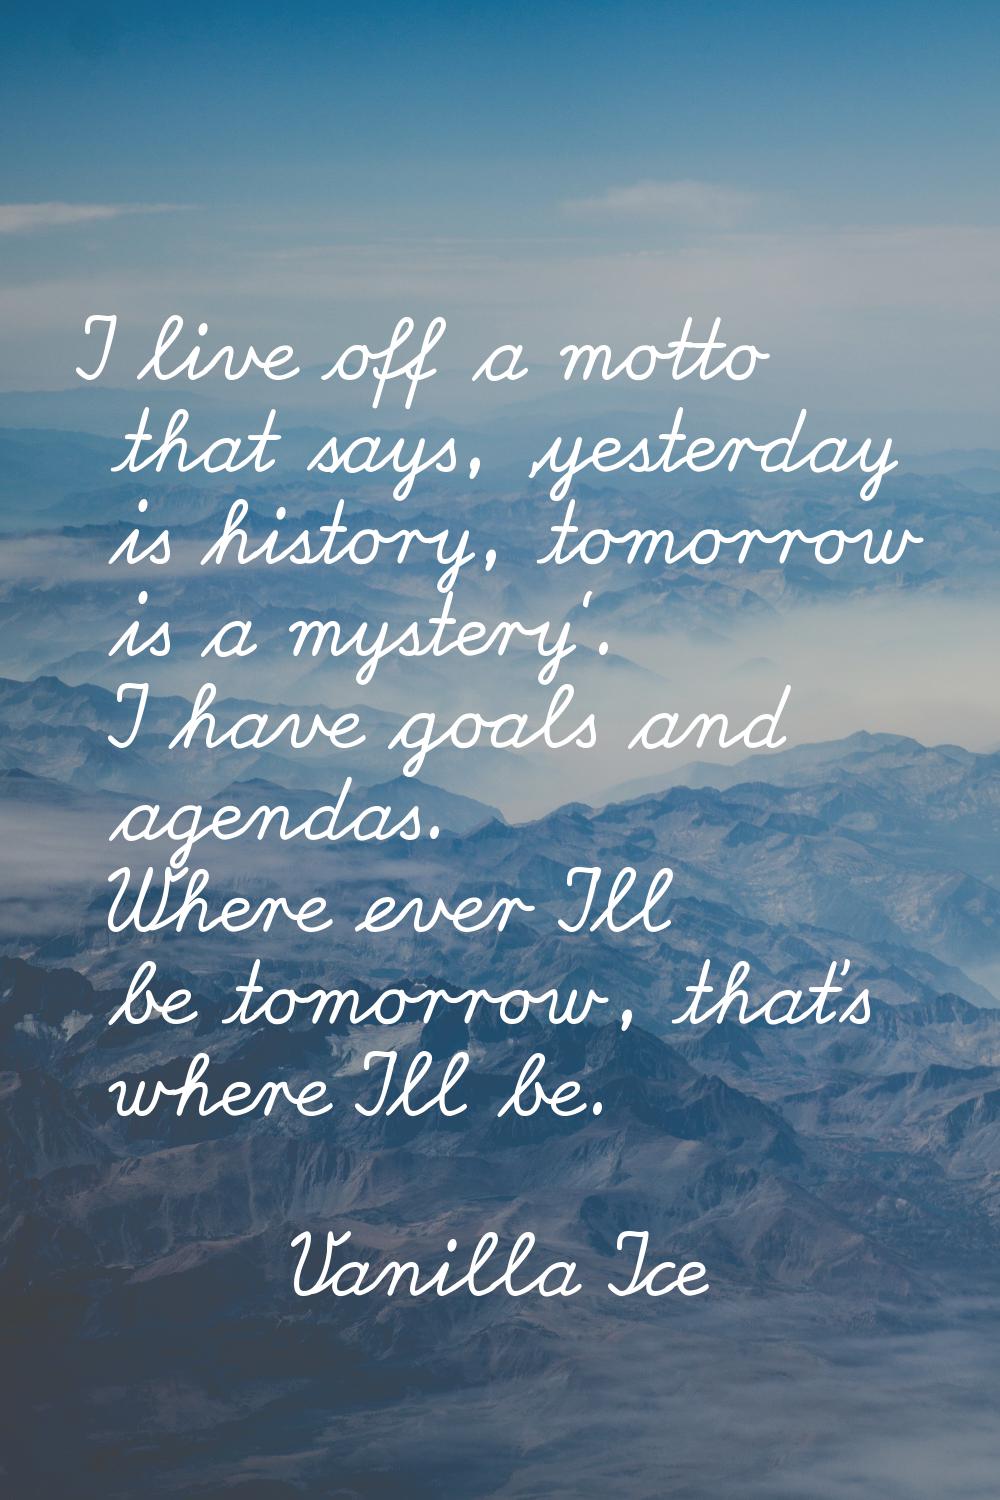 I live off a motto that says, 'yesterday is history, tomorrow is a mystery'. I have goals and agend